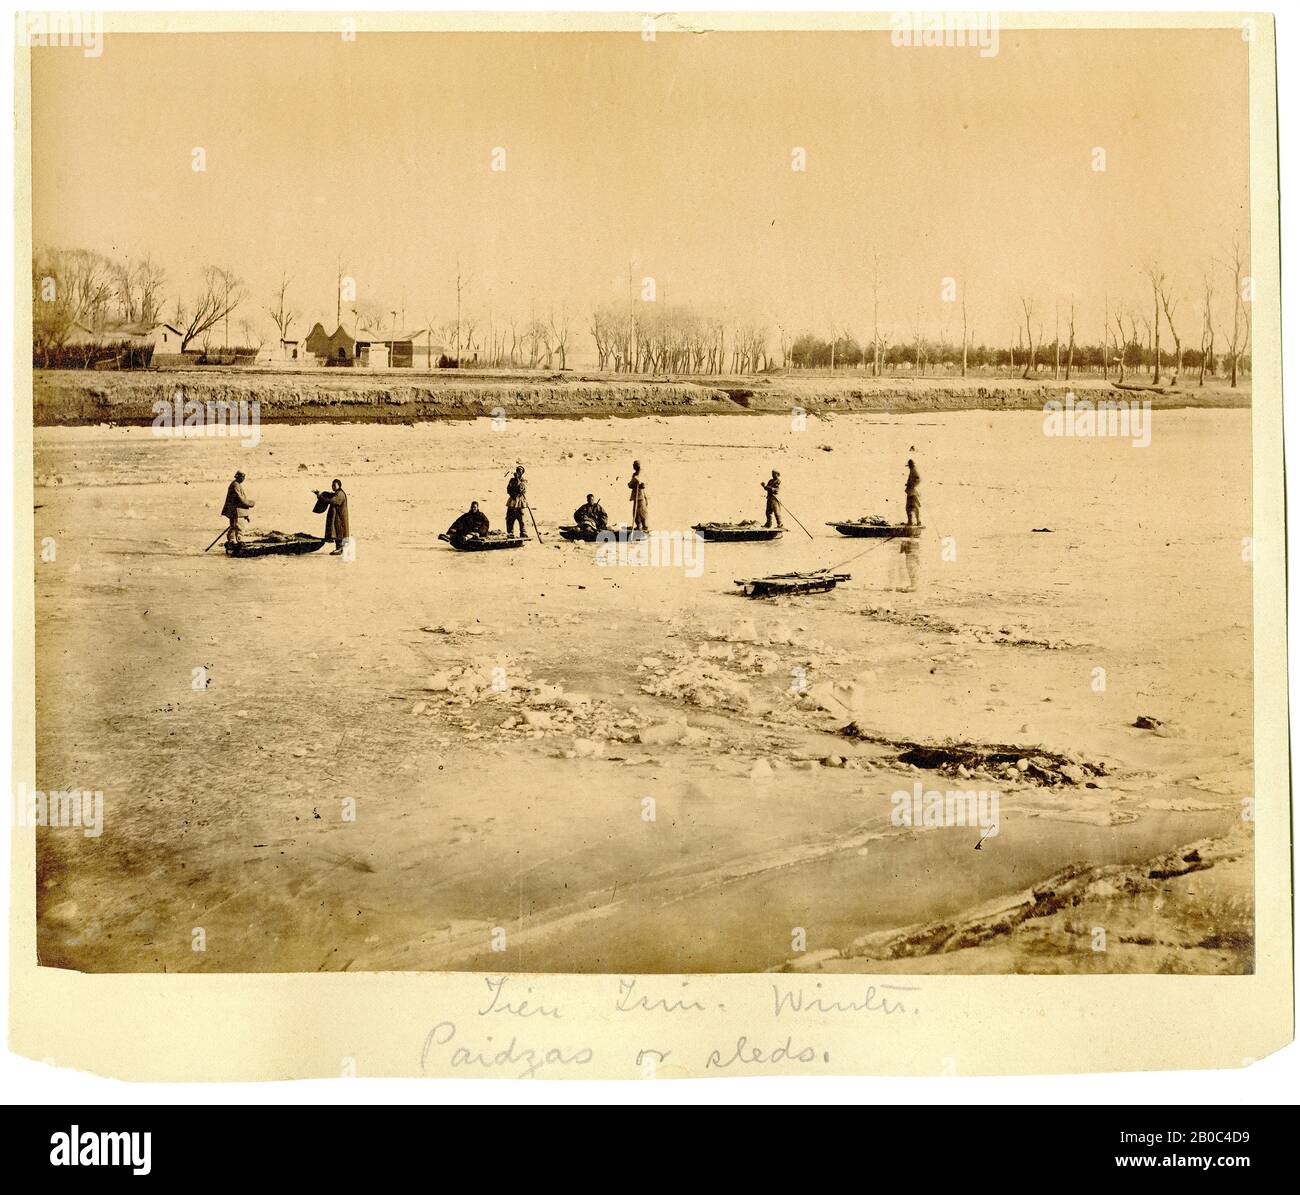 William Saunders, untitled (Men on Ice and Sleds), from A China Album, ca. 1870, albumen print Stock Photo